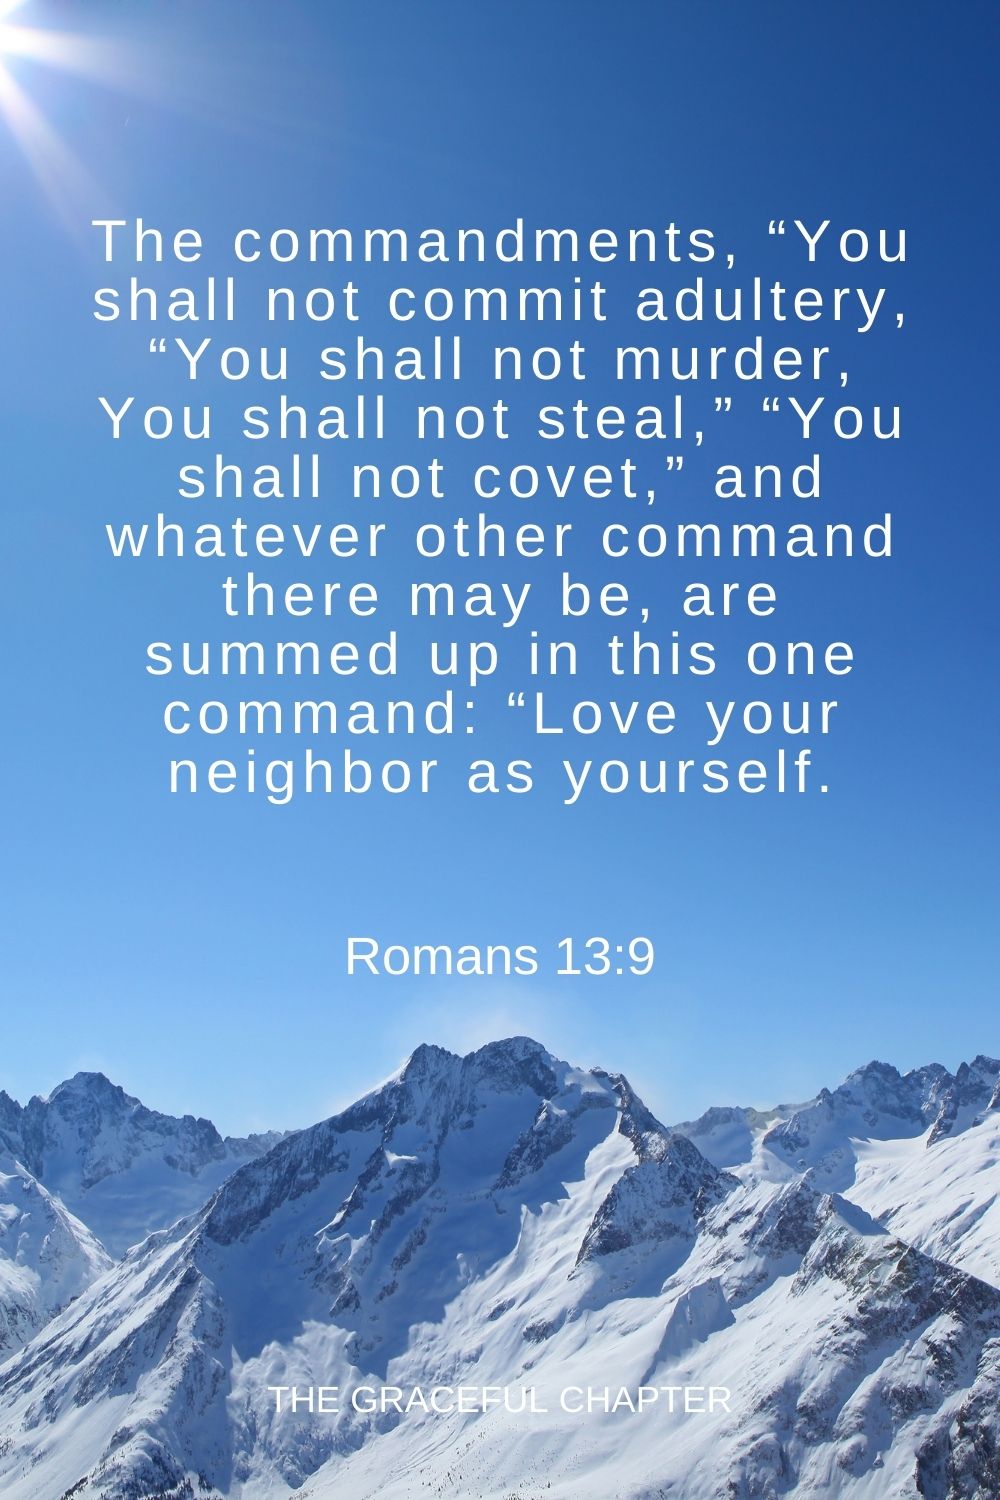 The commandments, “You shall not commit adultery, “You shall not murder, You shall not steal,” “You shall not covet,” and whatever other command there may be, are summed up in this one command: “Love your neighbor as yourself. Romans 13:9